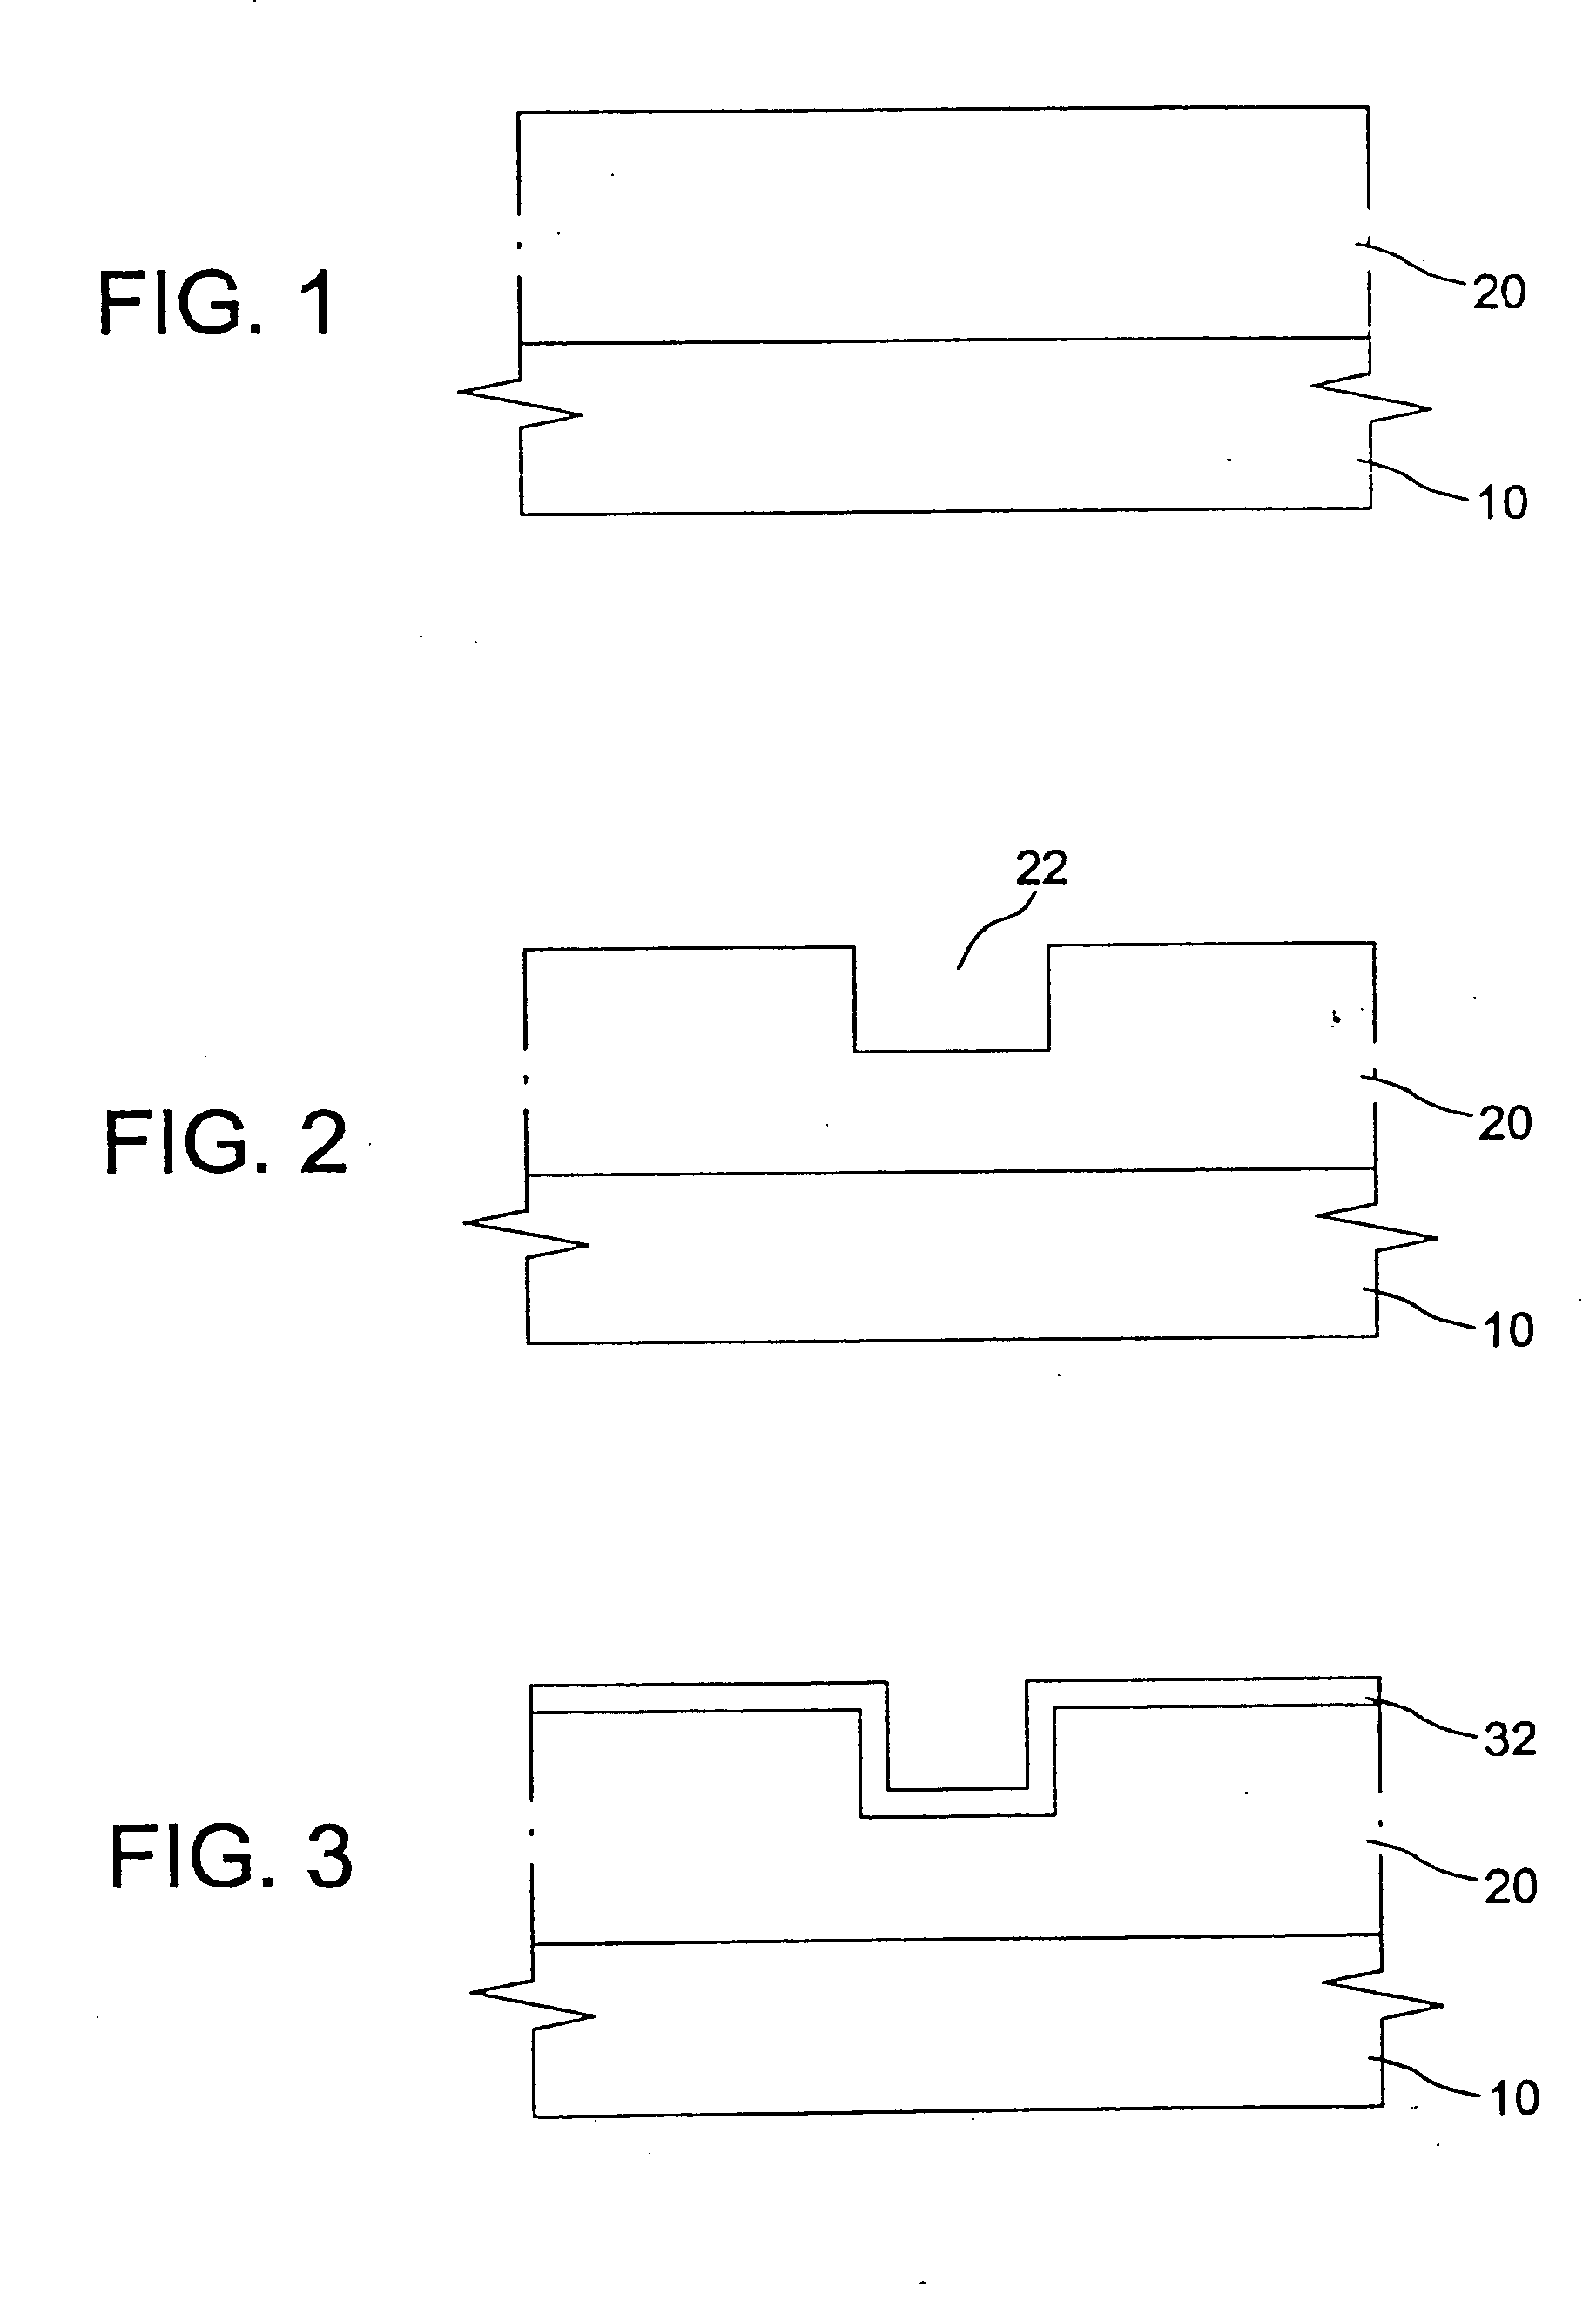 Copper interconnect structure having stuffed diffusion barrier